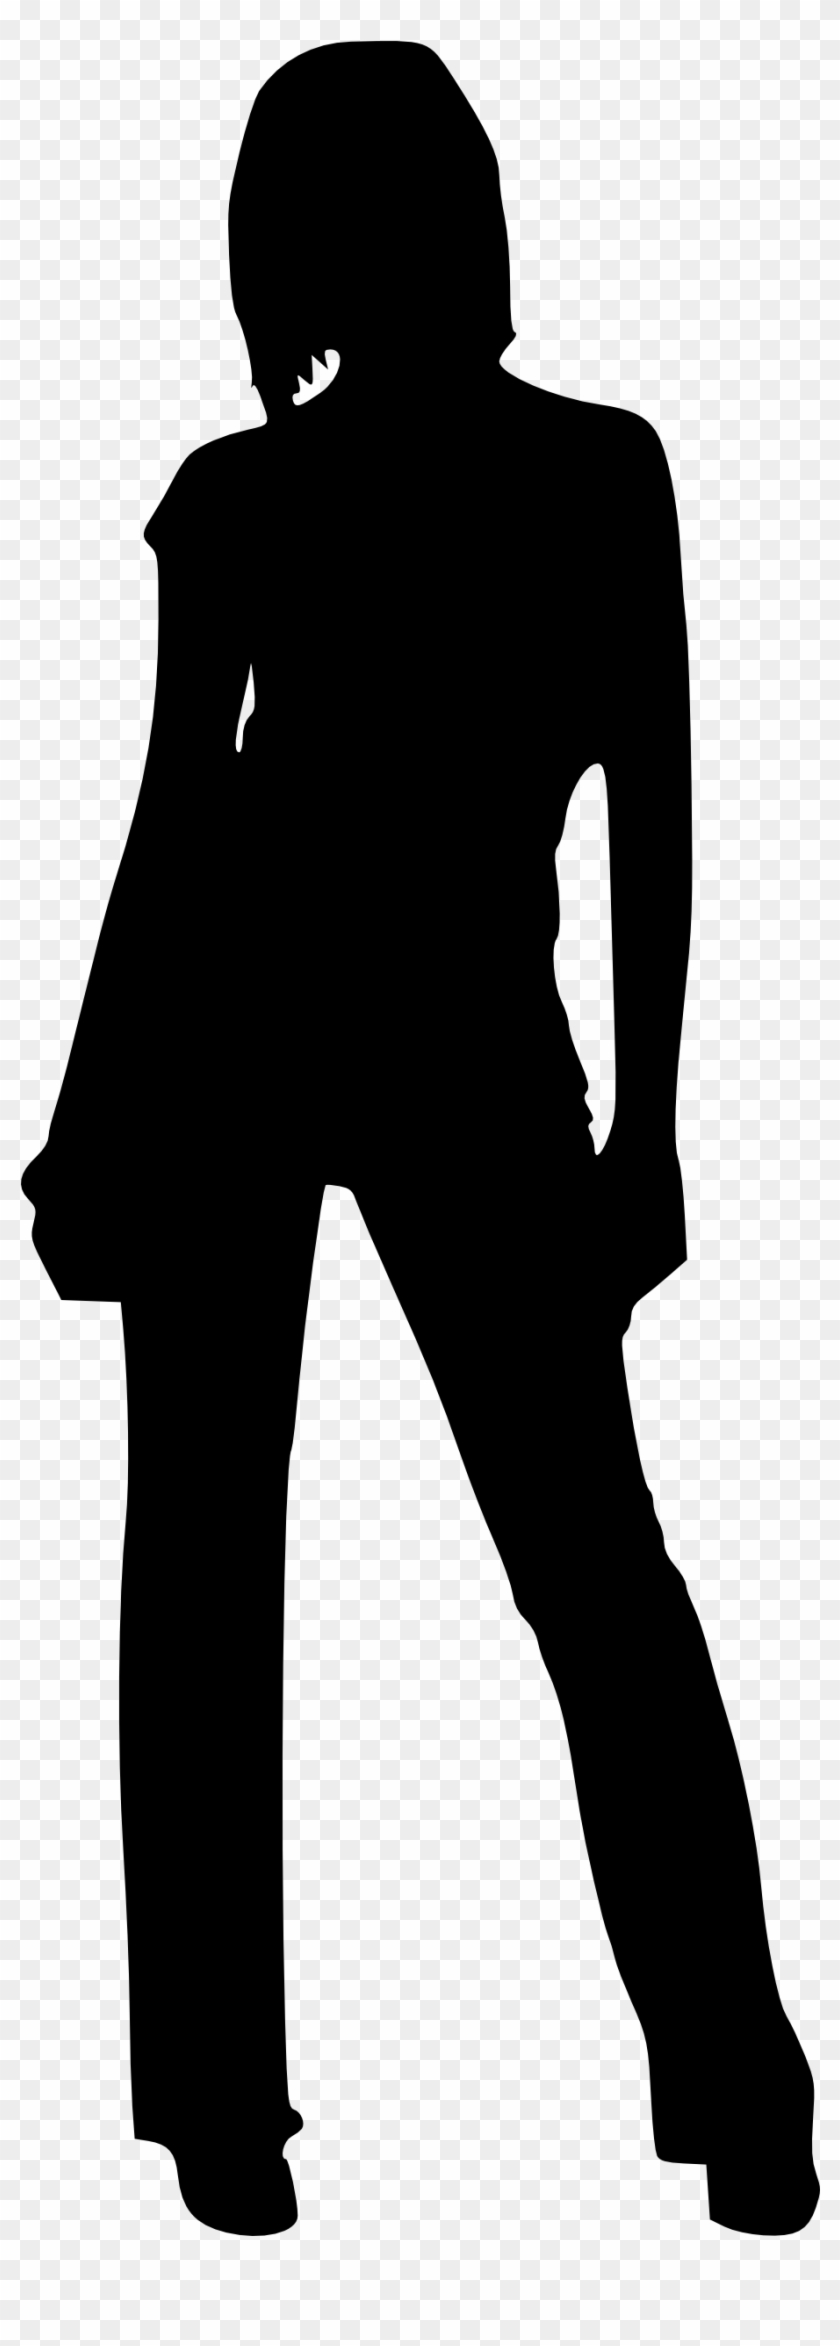 Lady With Hat Silhouette - Baseball Fielder Clipart #200460